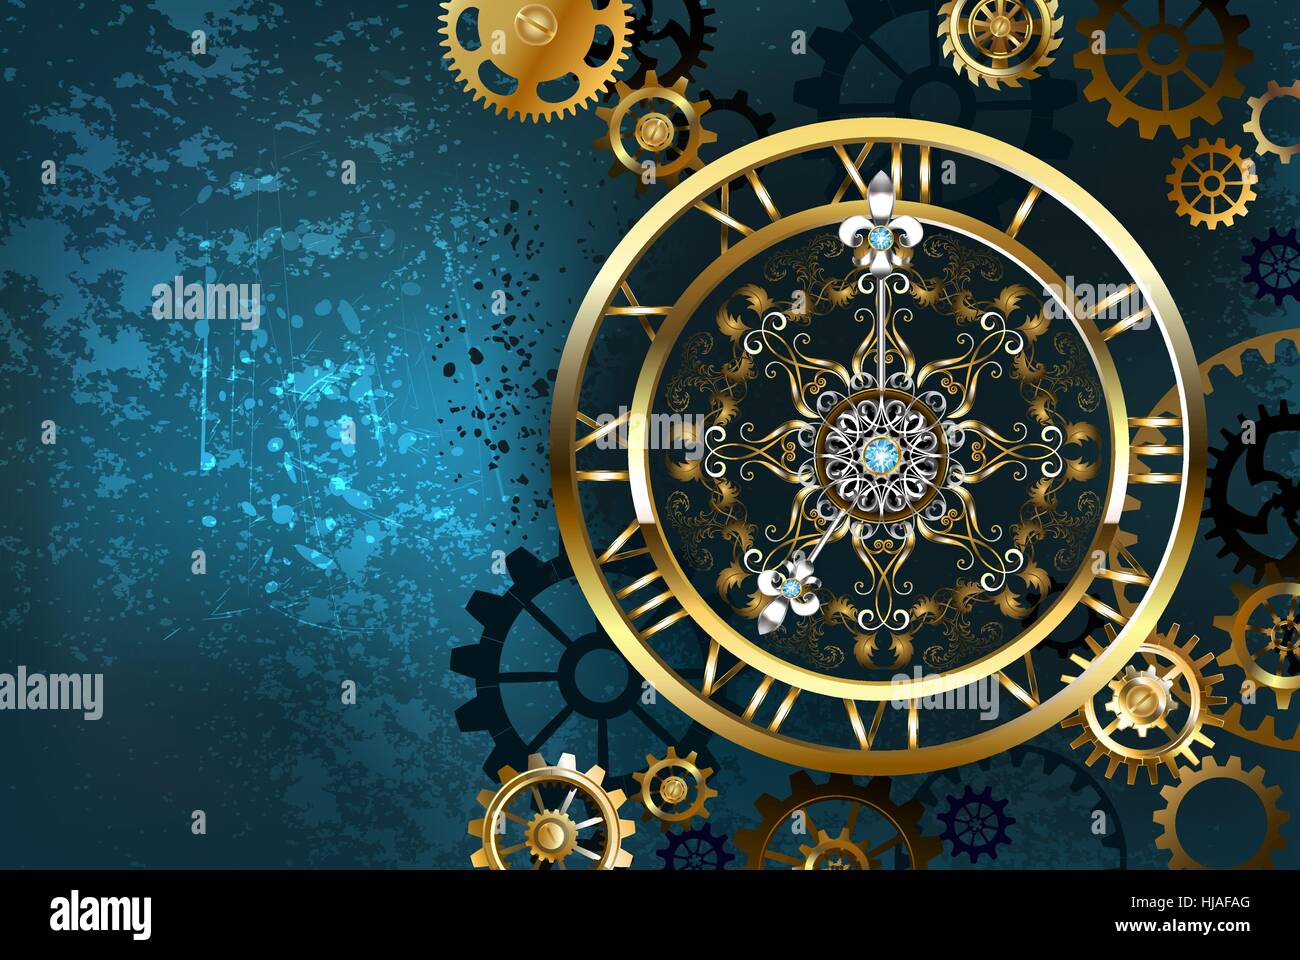 Golden Clock on Turquoise Background Stock Vector